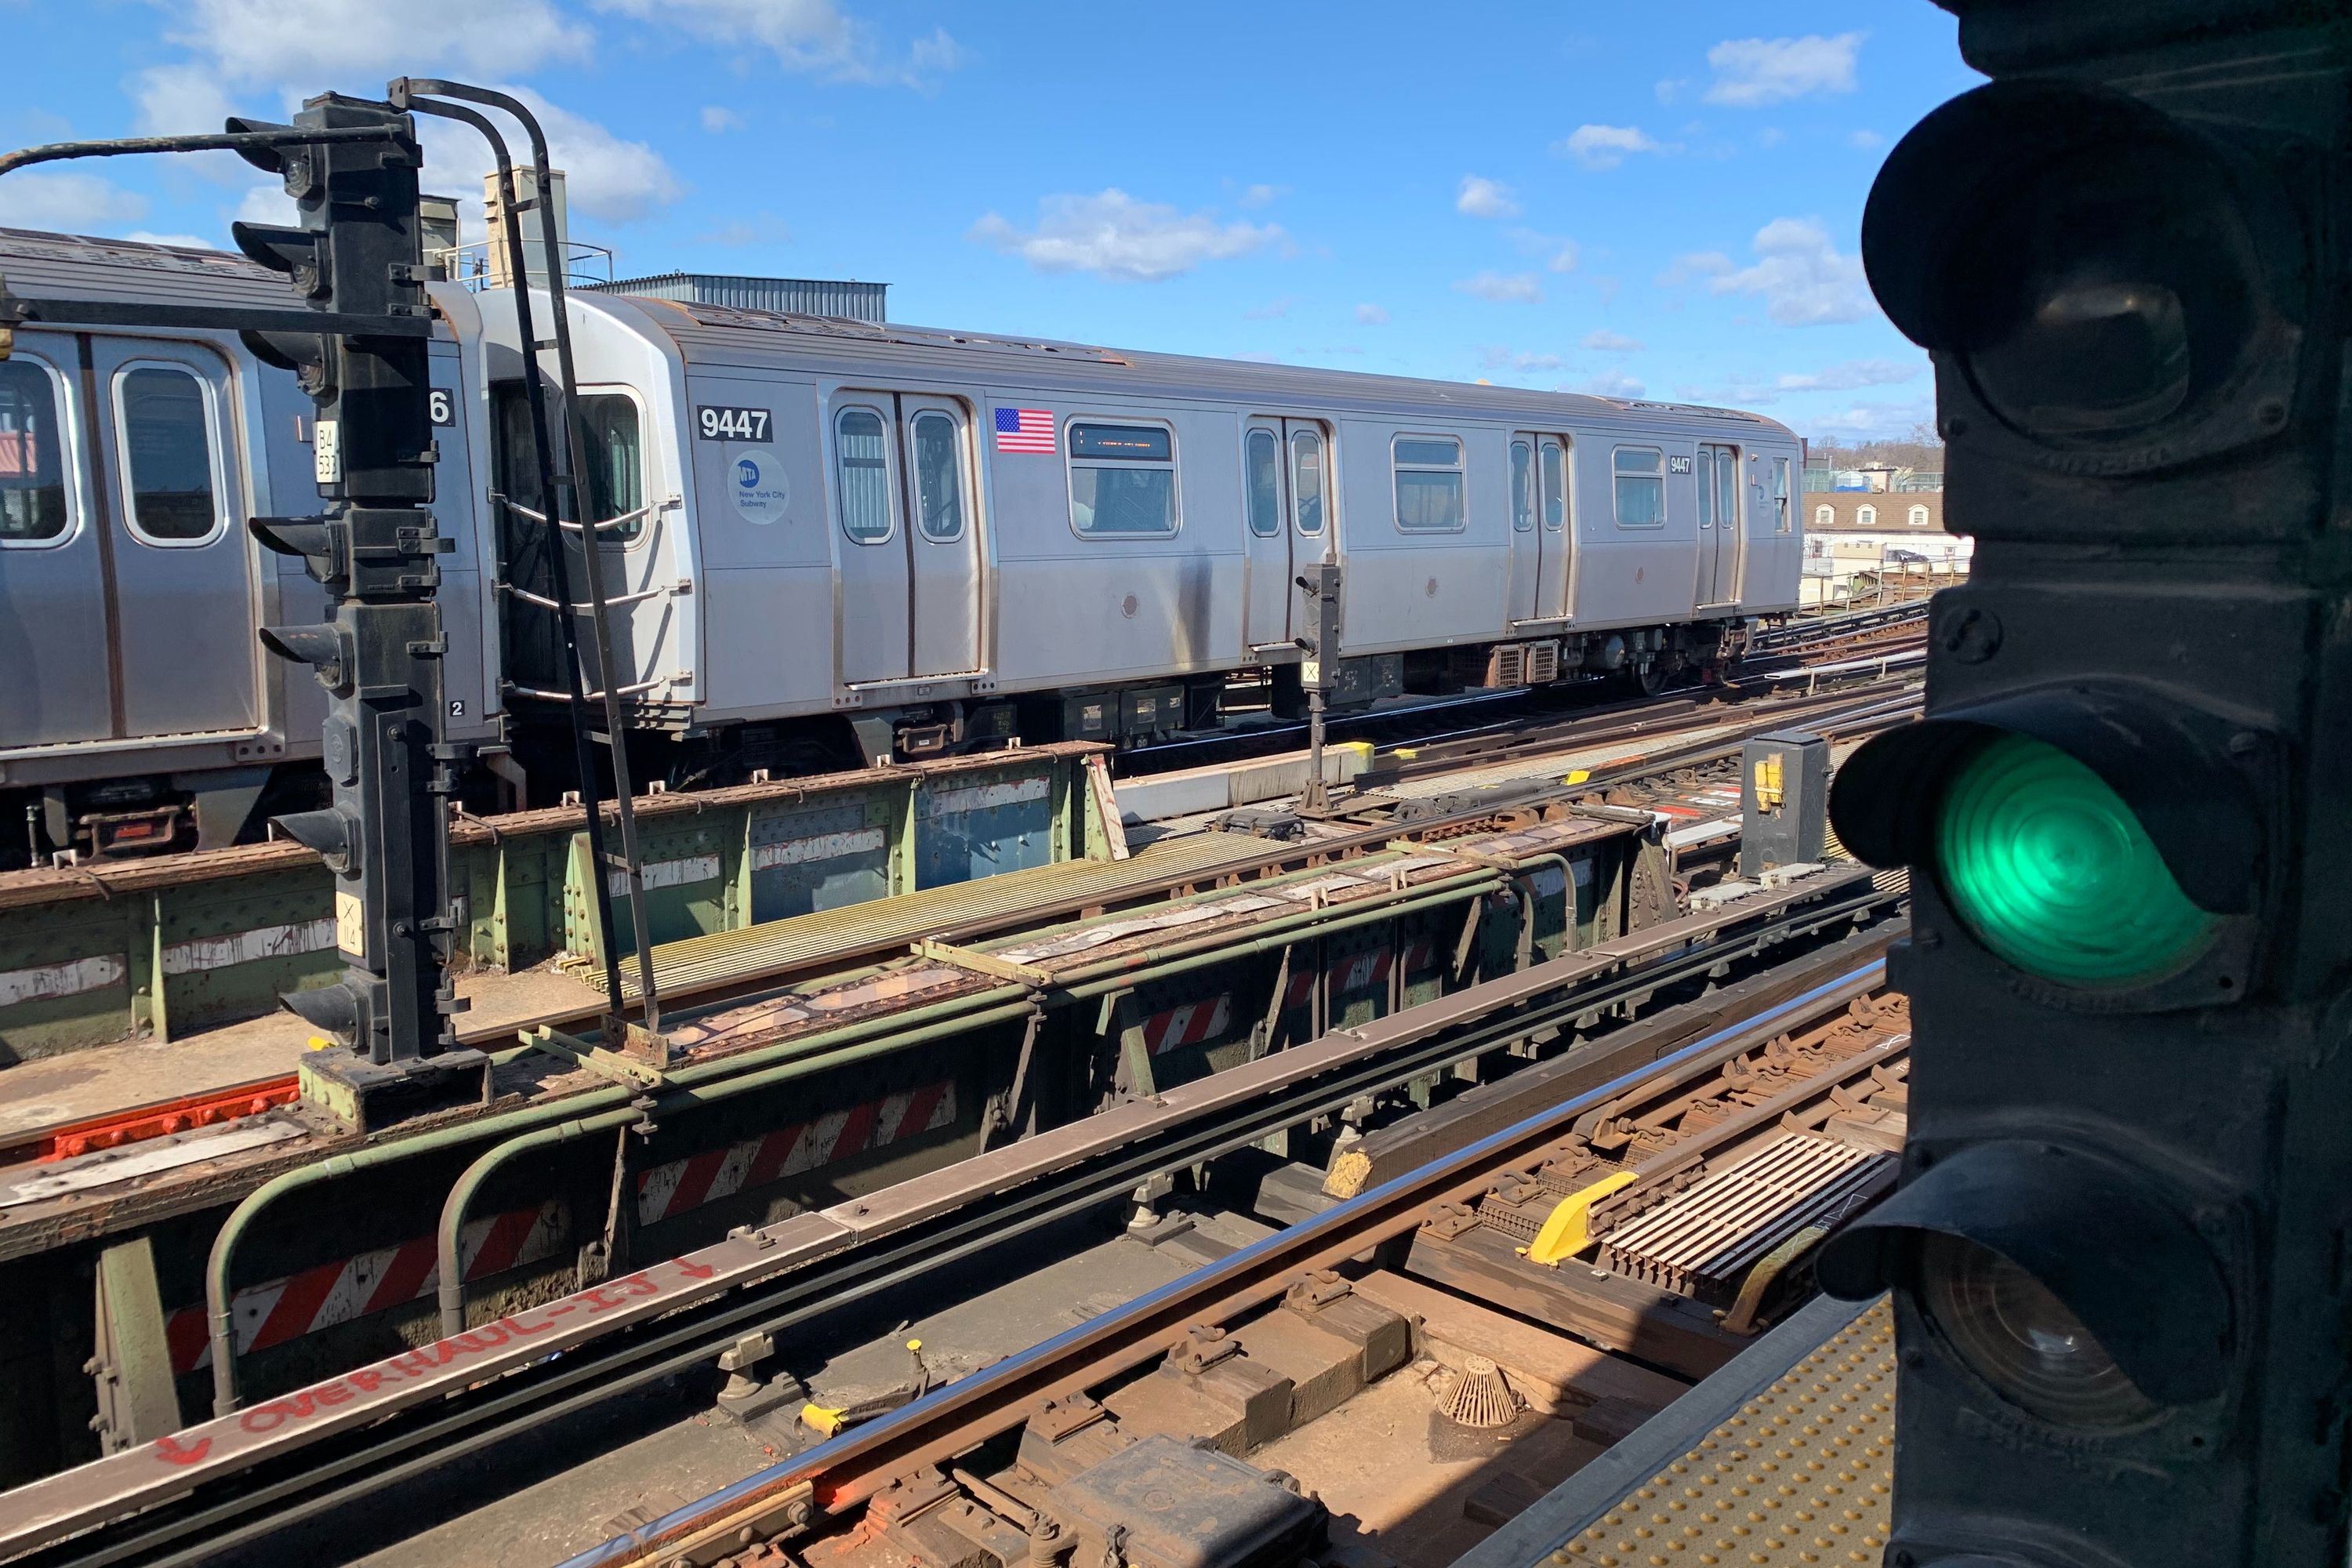 The Ditmas Avenue stop in Brooklyn is among the stations that will be closed for long-term signal work on weekends.